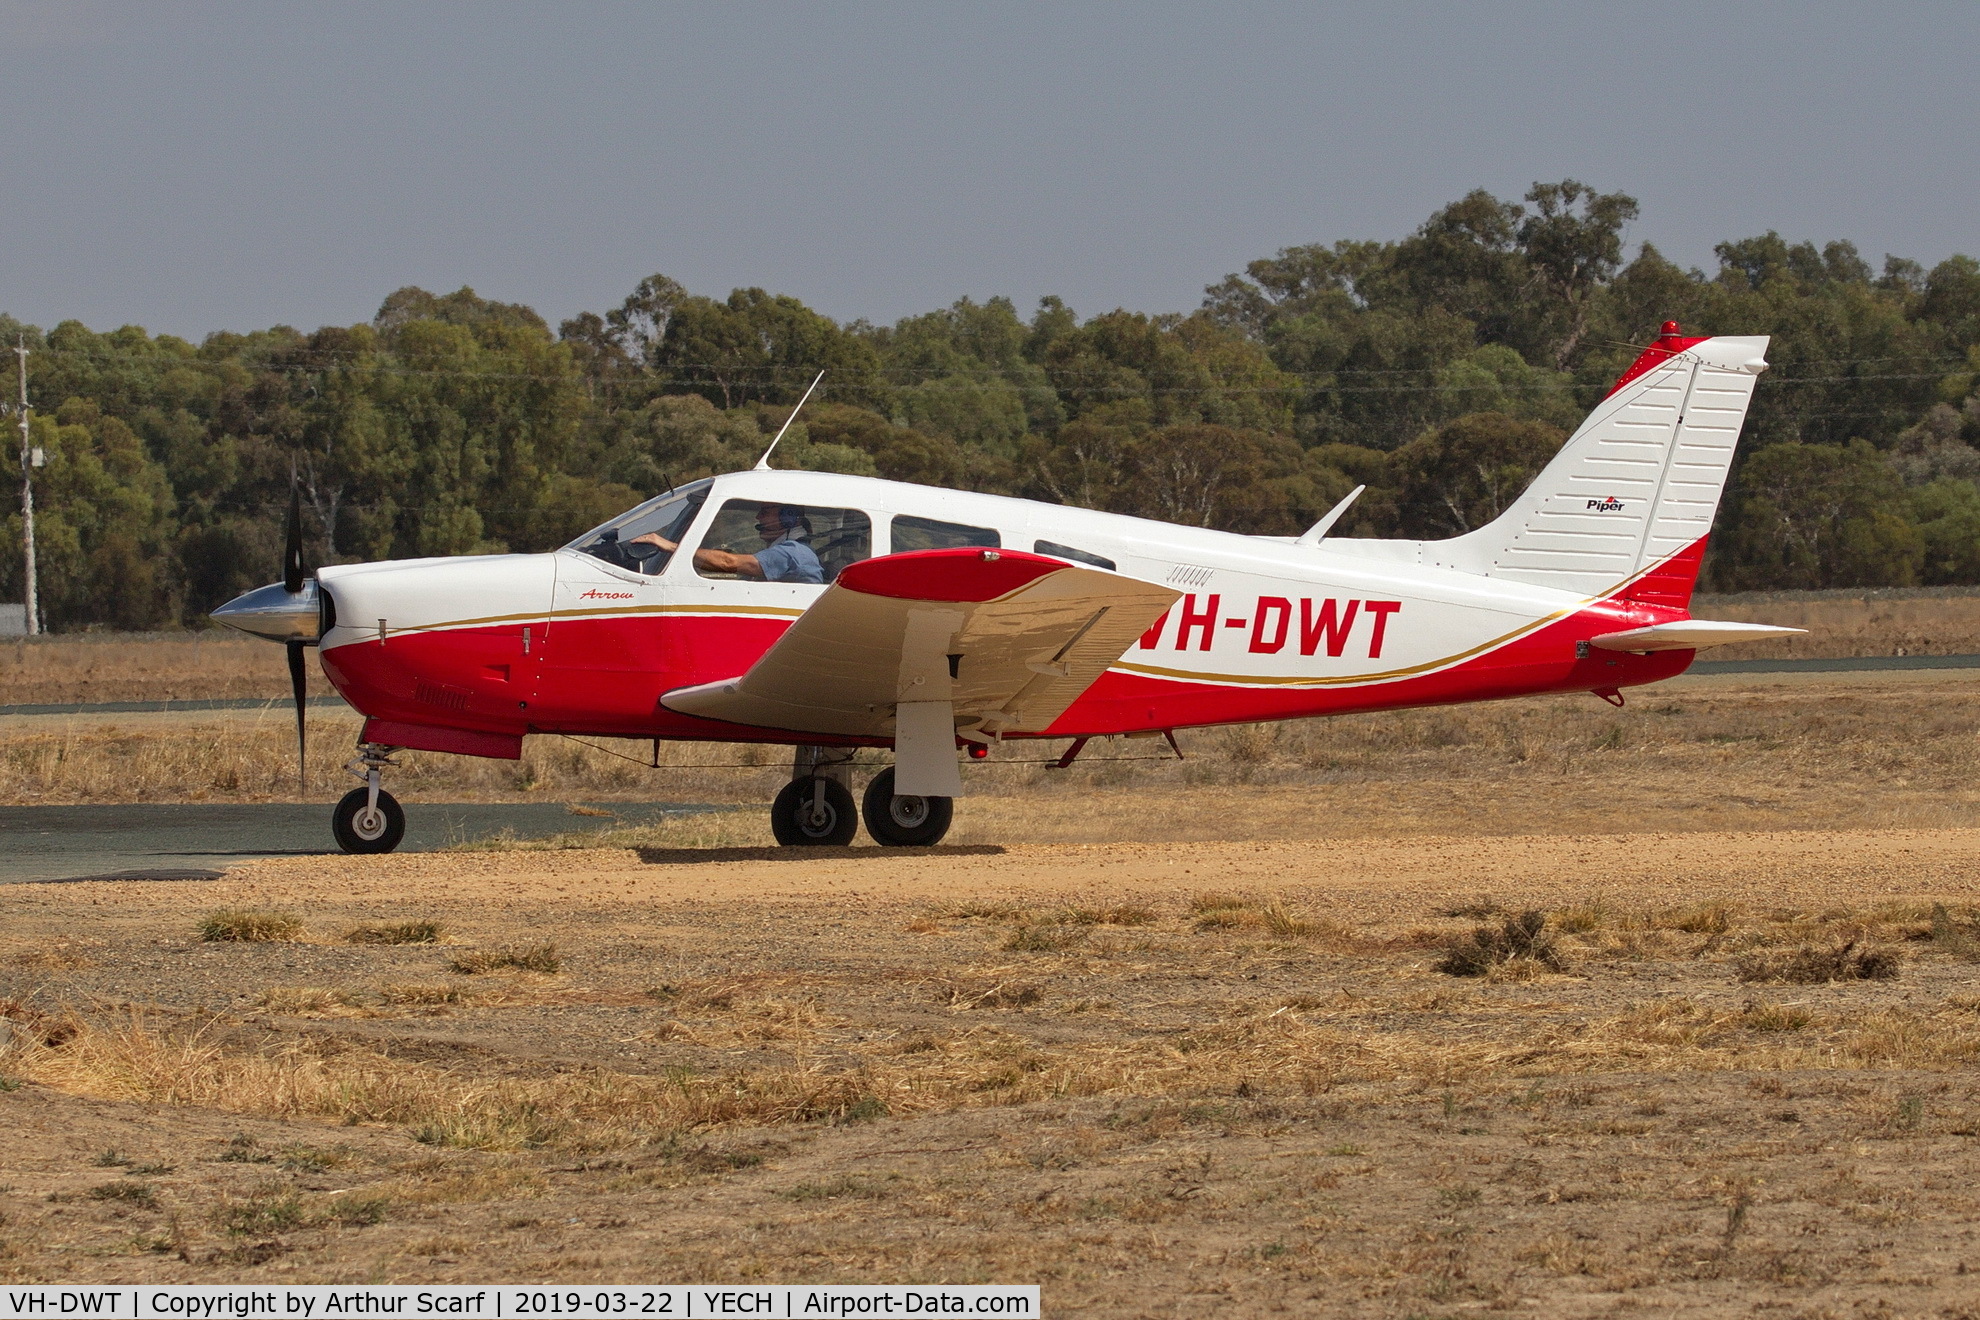 VH-DWT, 1975 Piper PA-28R-200 Cherokee Arrow II C/N 28R-7535004, Antique Aircraft Assn of Australia fly in at Echuca YECH March 2019